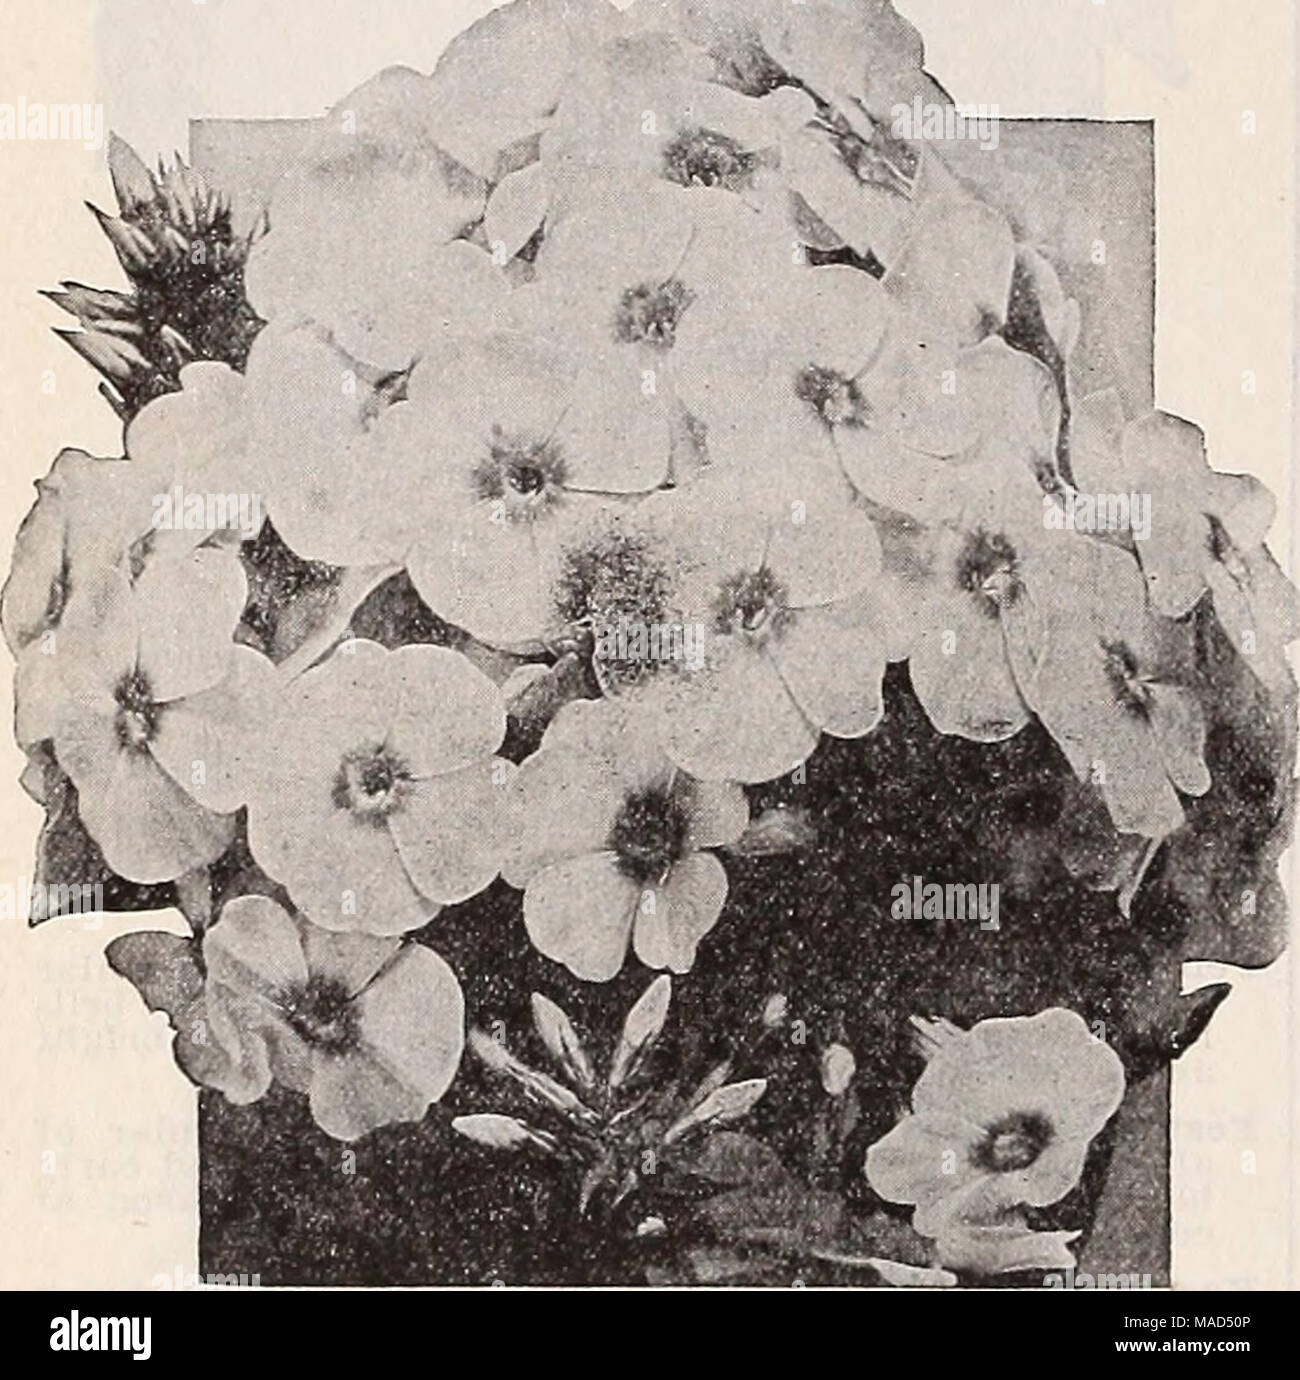 . Dreer's wholesale catalog for florists : winter - spring - summer 1938 . Hardy Perennial Phlox Hardy Perennial Phlox Strong, one-year, field-grown plants Antouin Slercie (Medium). Light ground color prettily suffused bluish lilac. Bclaireur (Tall). Rosy magenta with large lighter halo. Enchantress (Medium). A vigorous salmon-pink. Firebrand (Medium). Bright vermilion-scarlet with deeper center. Large, strong trusses. Jules Sandeau (Dwarf). A very free-flowering deep salmon-pink. Beautiful large trusses. Xia VagTie (Medium). Pure mauve, aniline-red eye. Mrs. Jenkins (Tall). The best tall earl Stock Photo